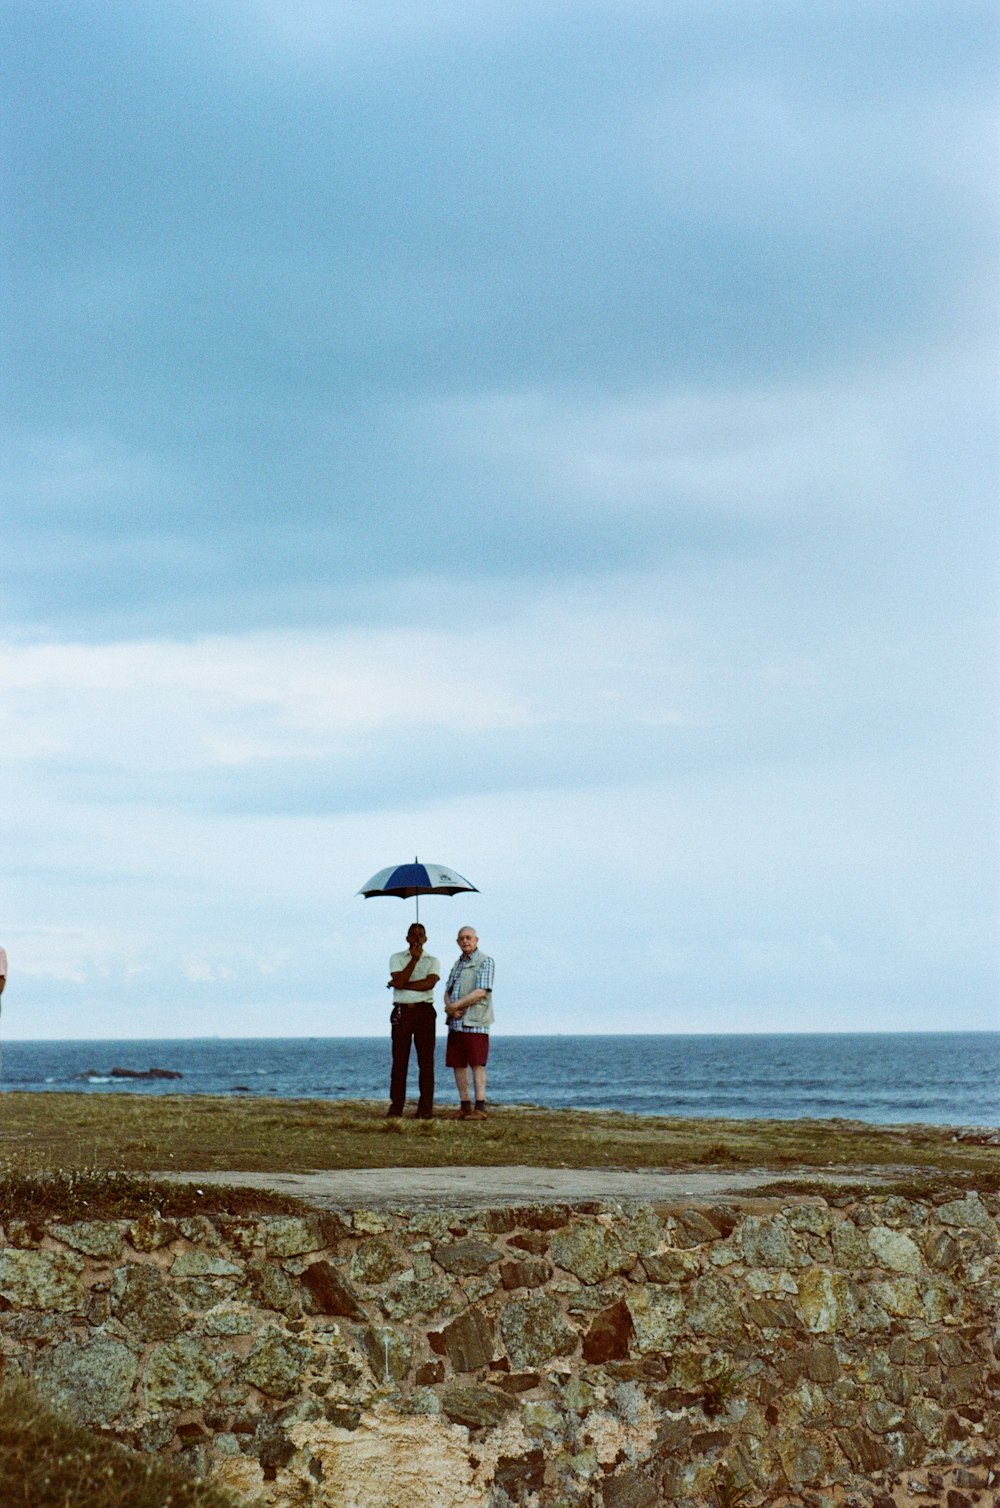 two people standing under an umbrella on a beach